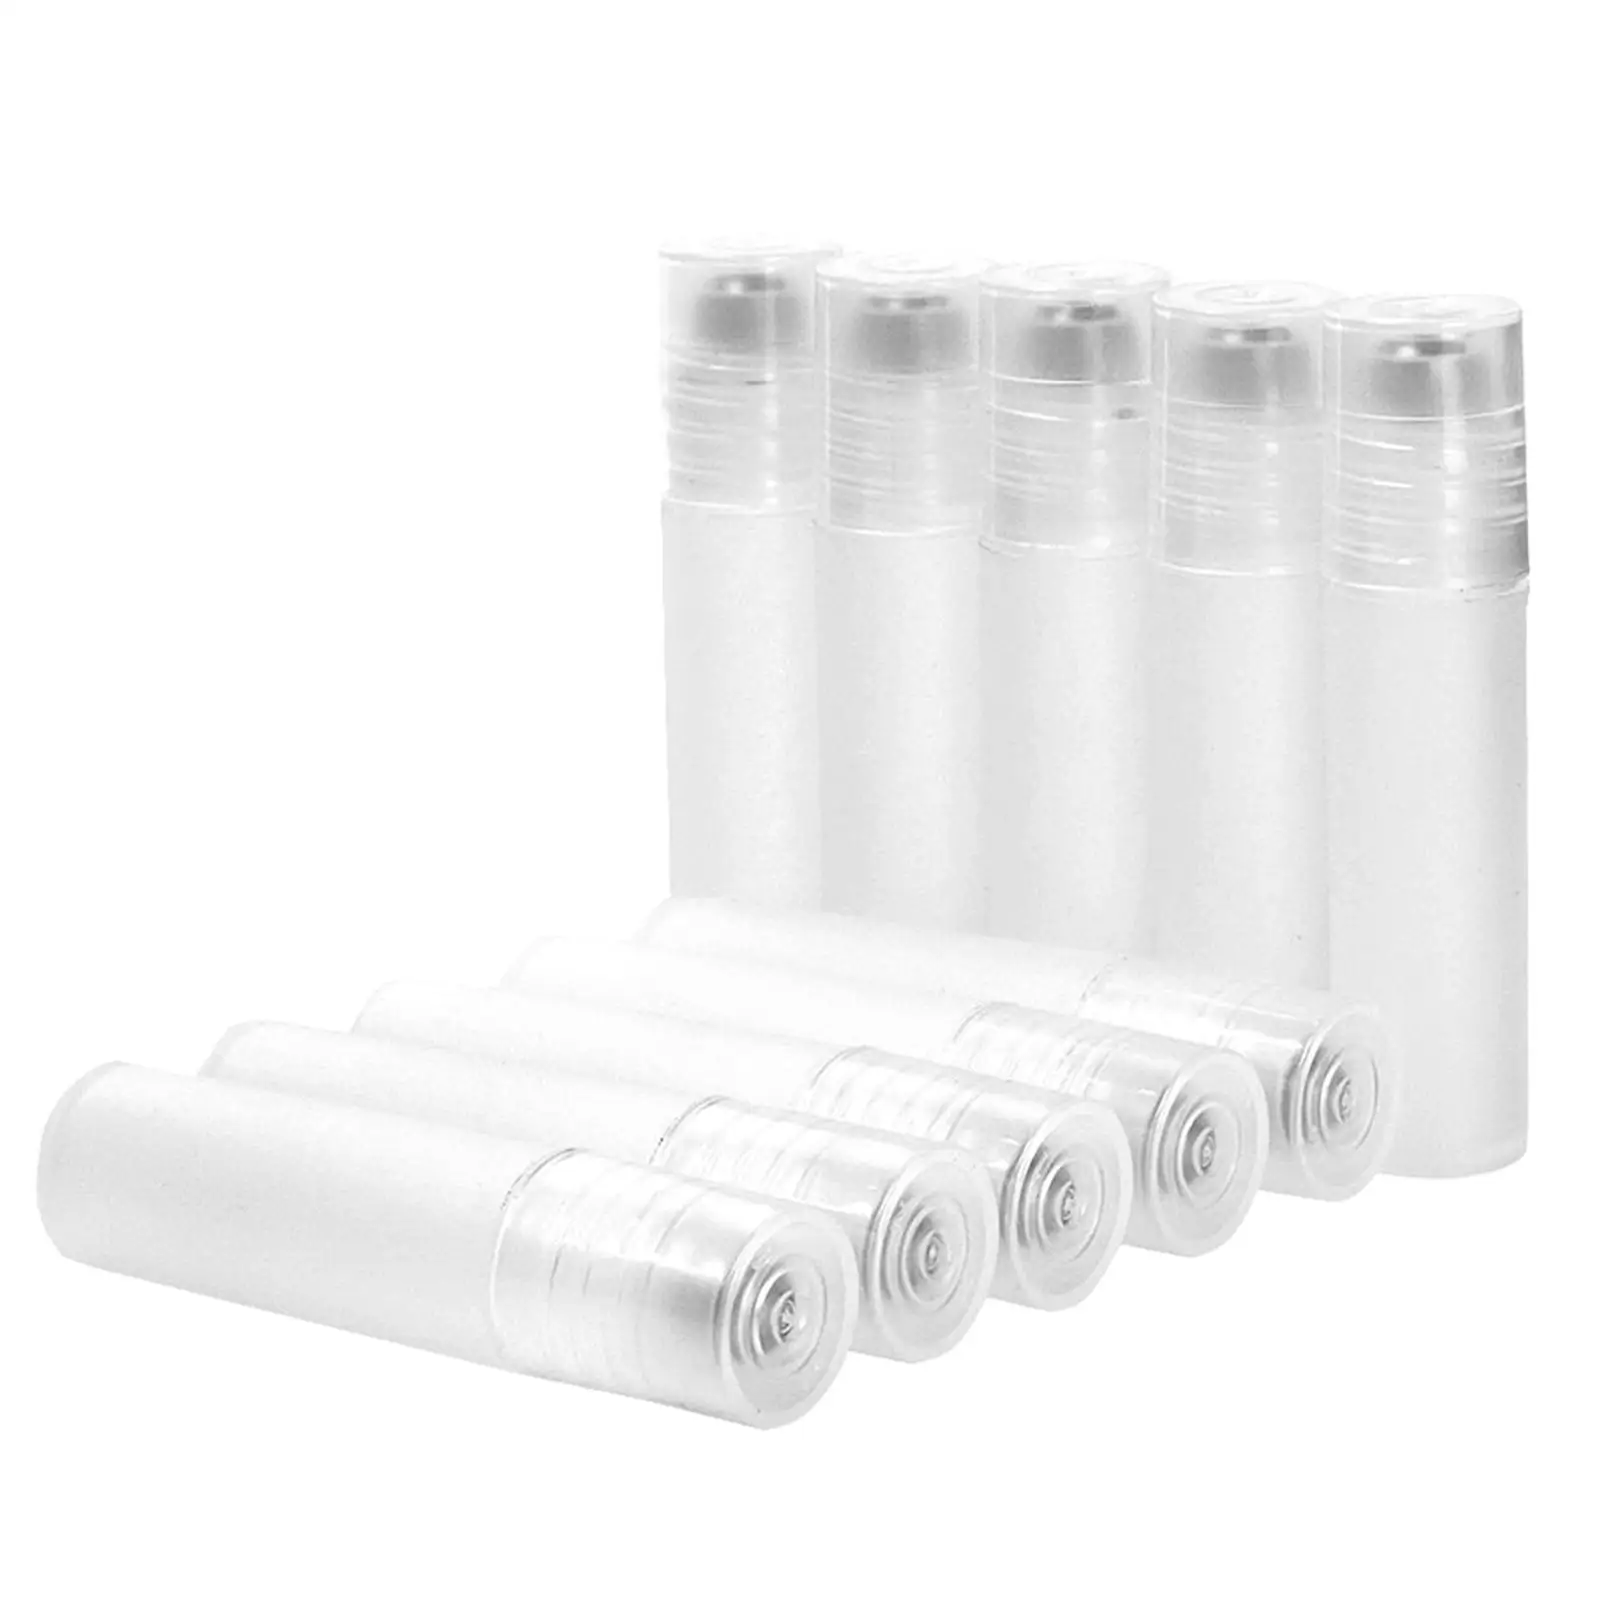 10pcs 5ml Empty   Bottles Container Travel Vials for Essential Oils 